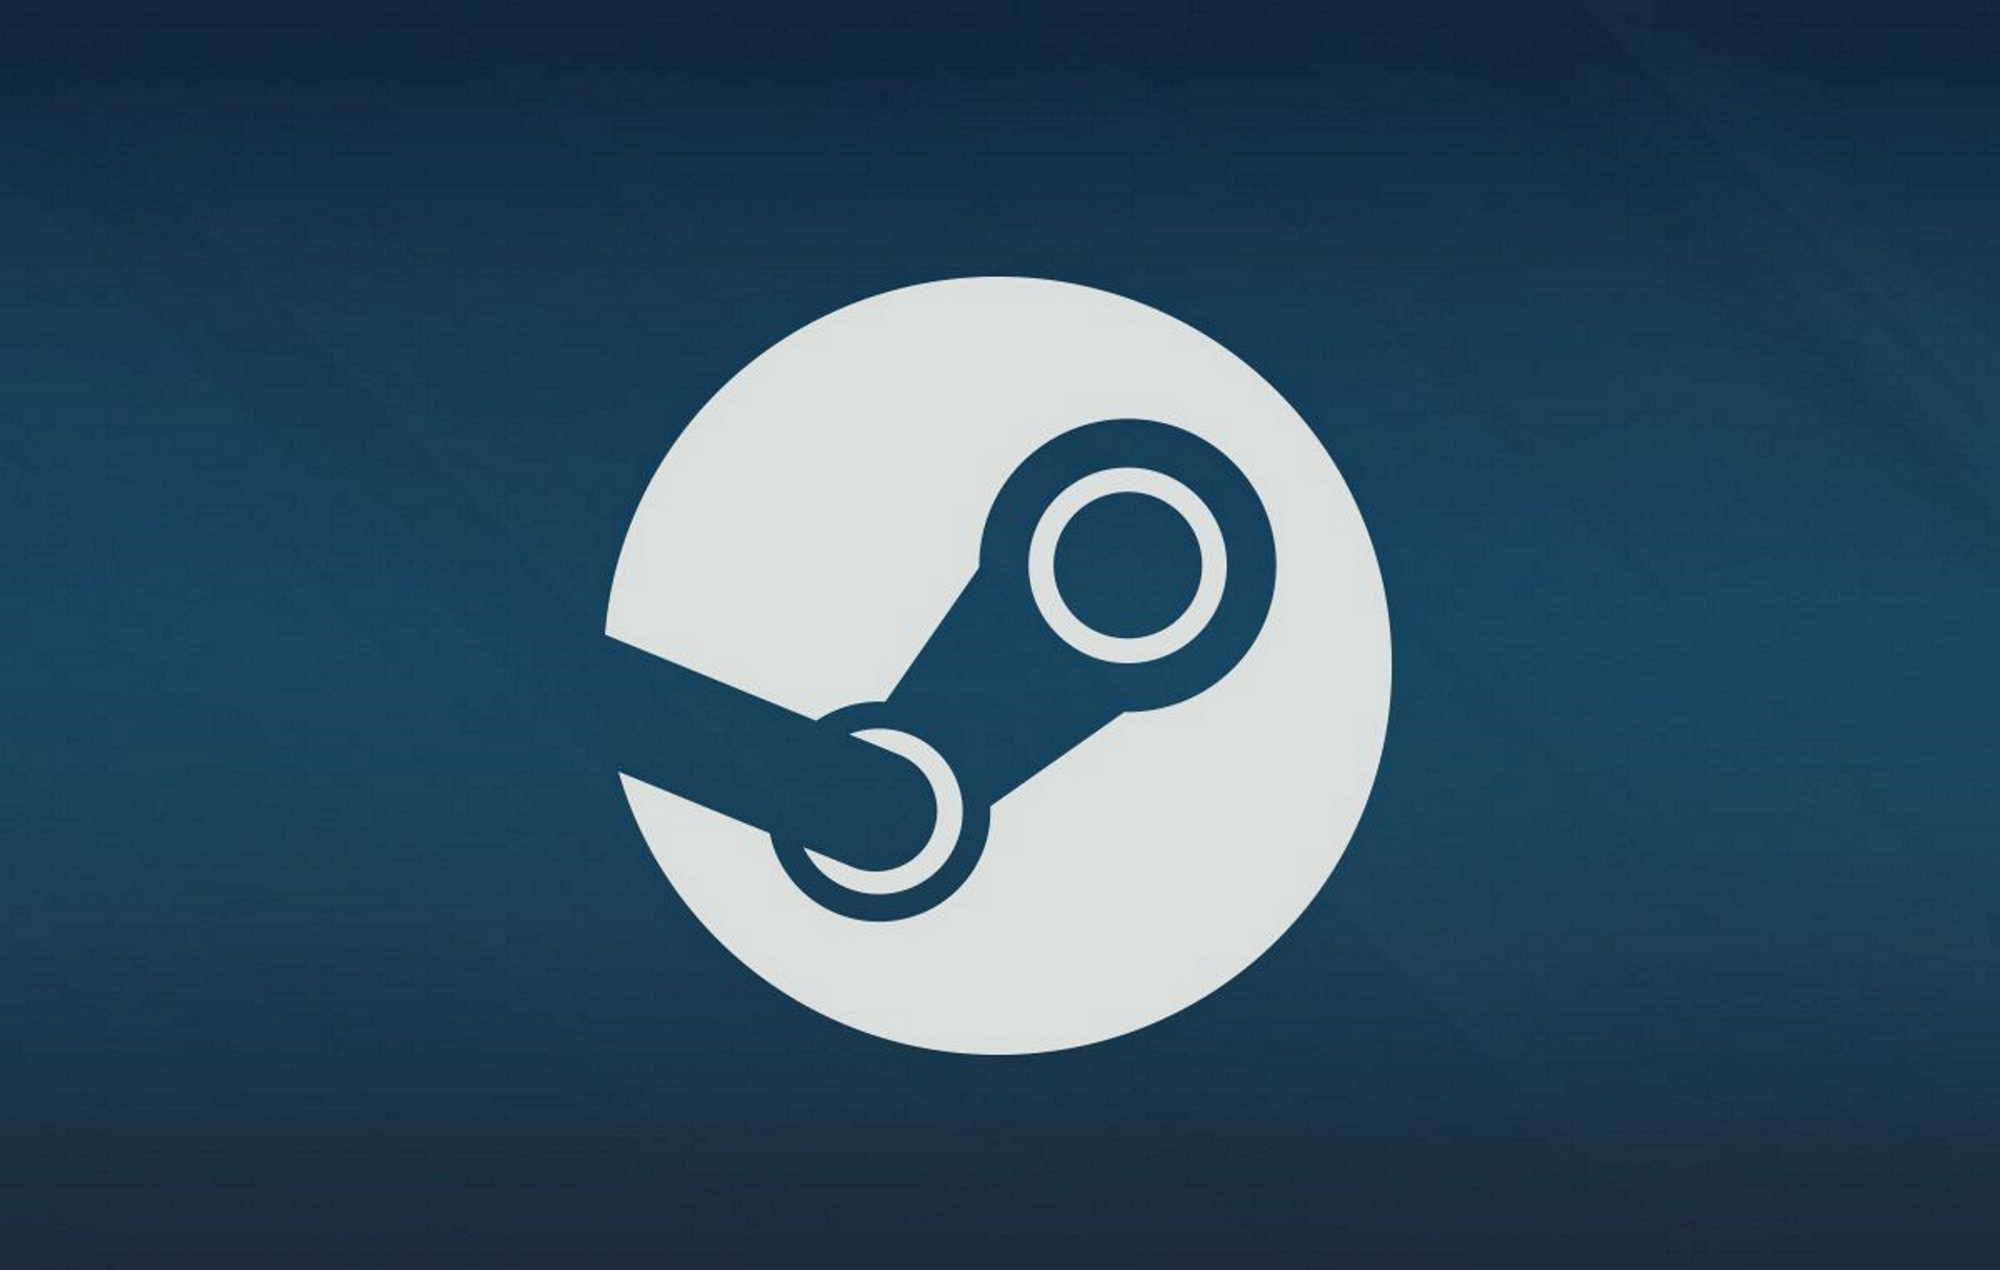 can steam download games in sleep mode